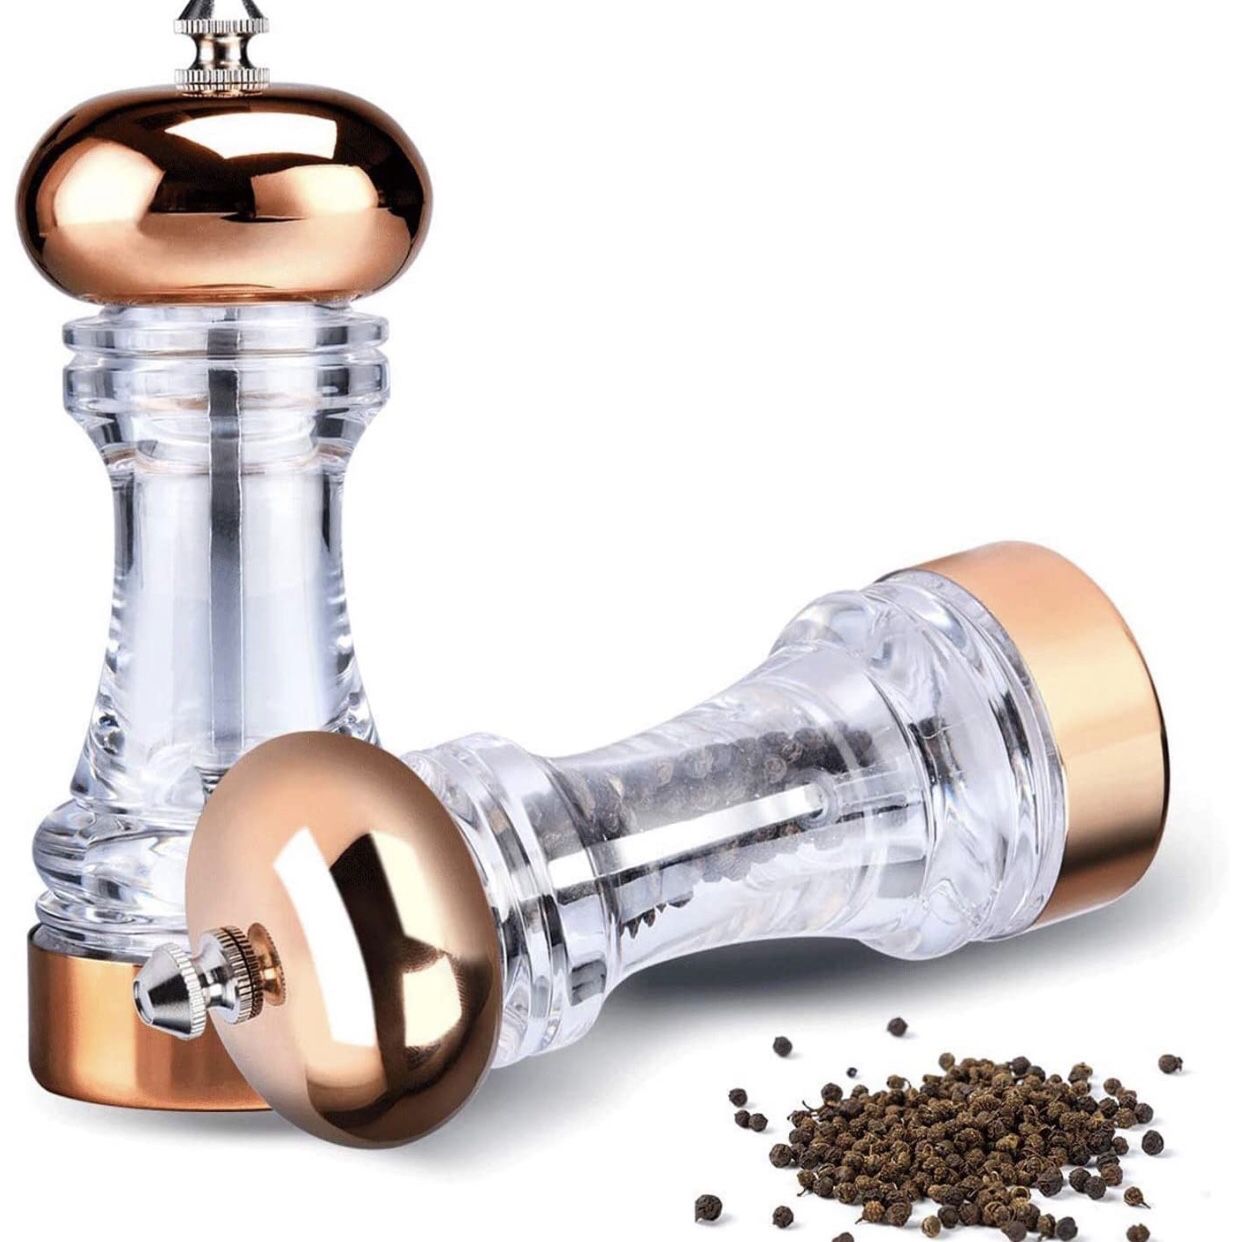 Mr. Rudolf Original Stainless Steel Salt and Pepper Grinder Set With Stand - Tall Salt and Pepper Shakers with Adjustable Coarseness